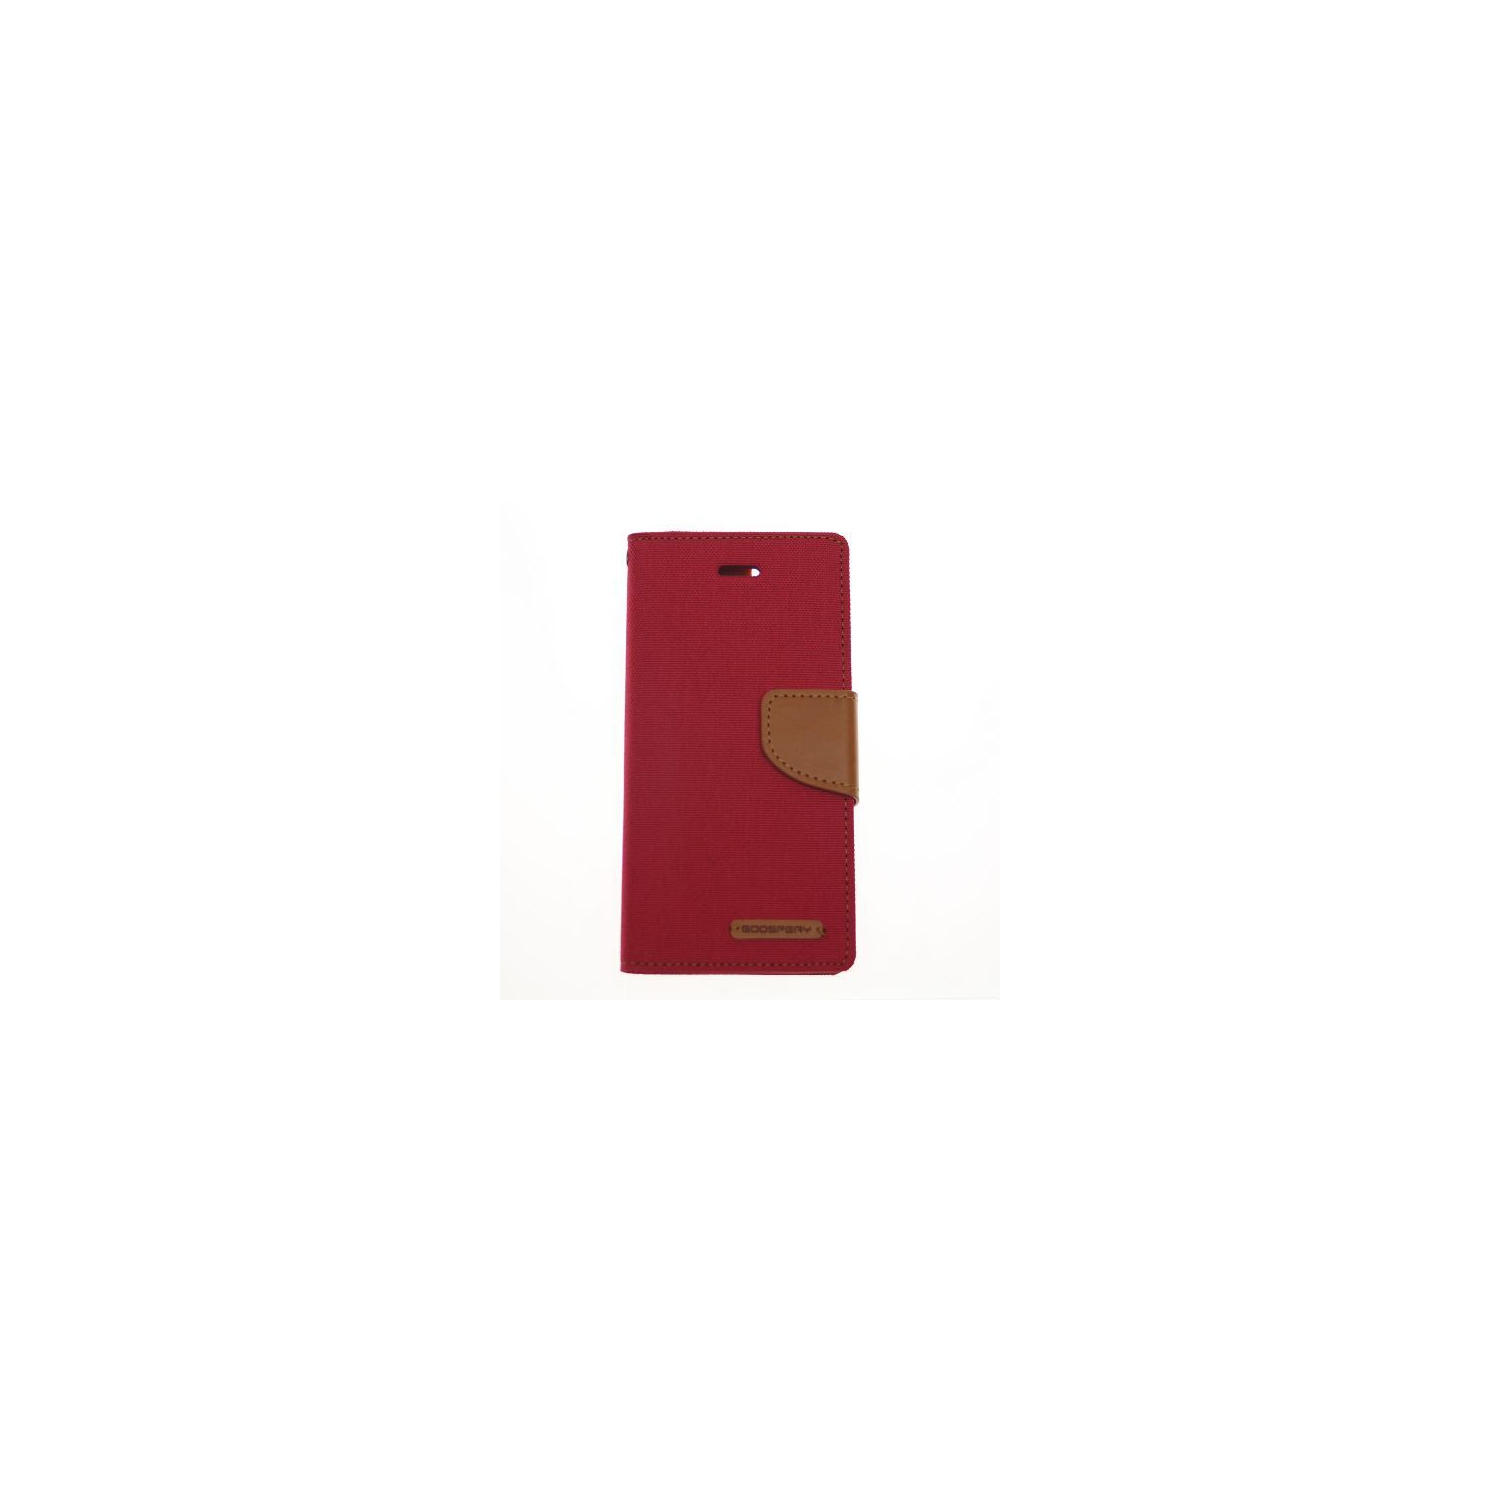 Iphone 5/s/SE Goospery Canvas Diary Case, Red